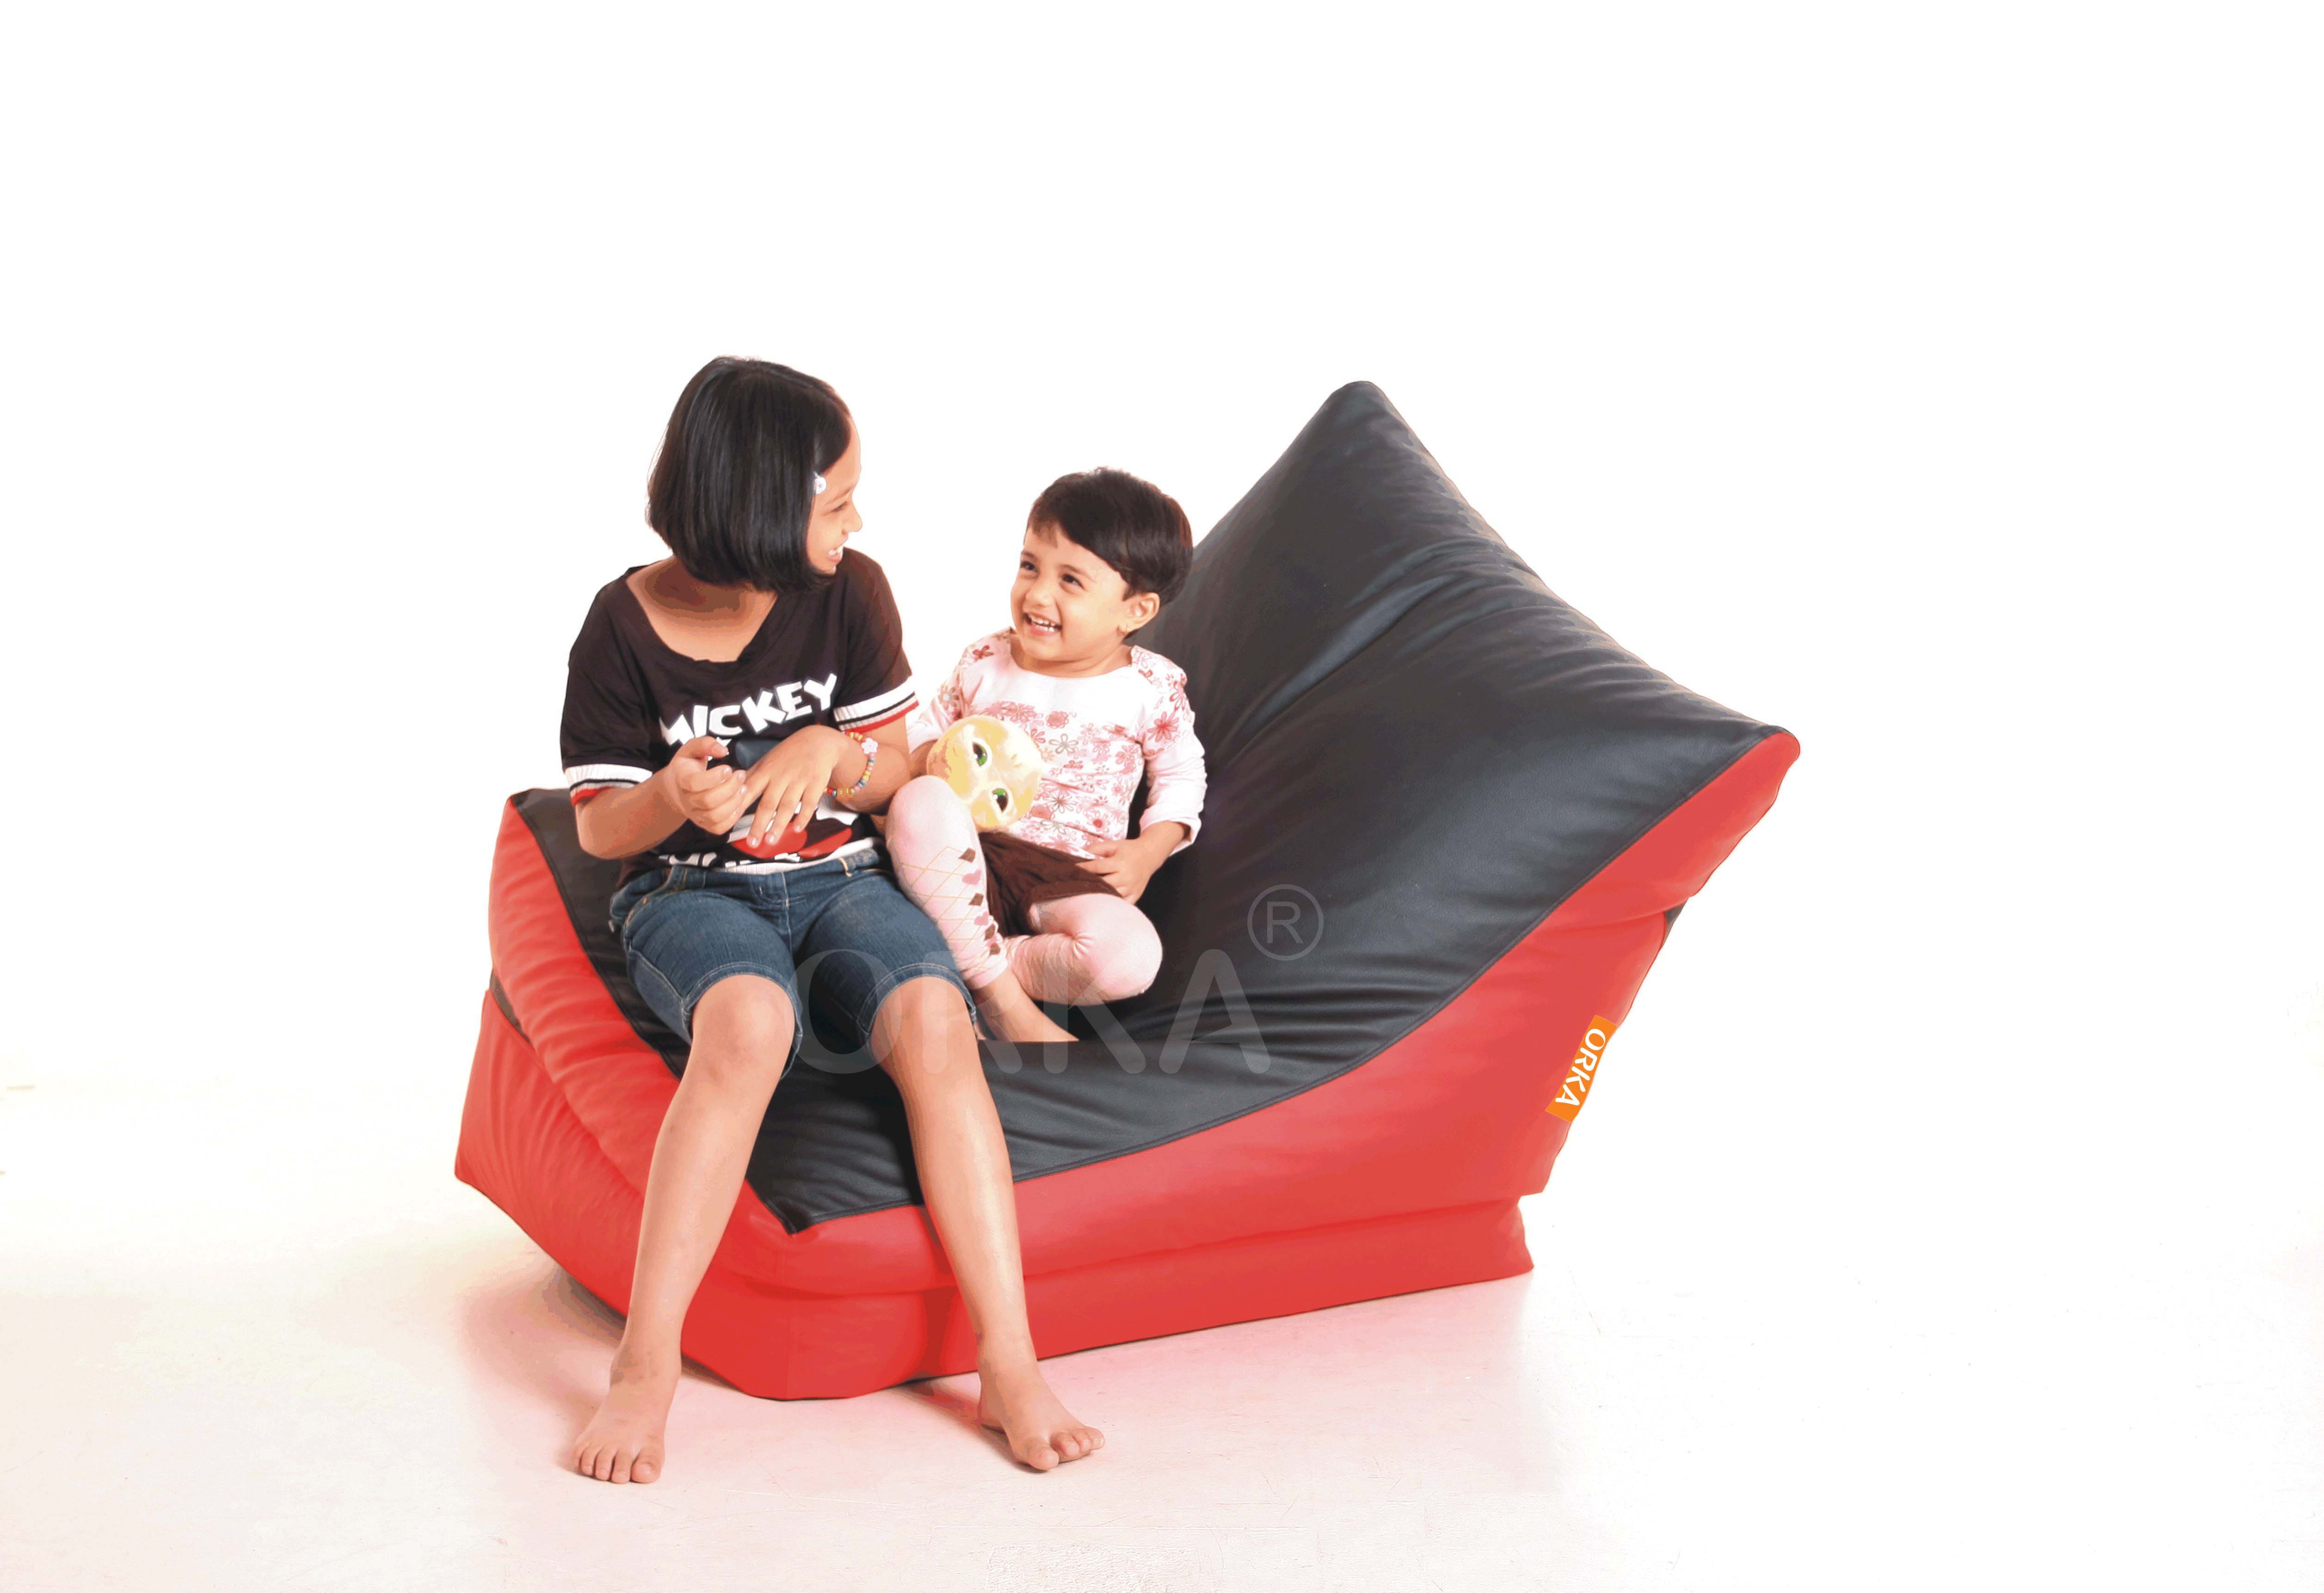 ORKA Art Leather Children Sitting On Lounger Filled With High Density Beans - Red Black  